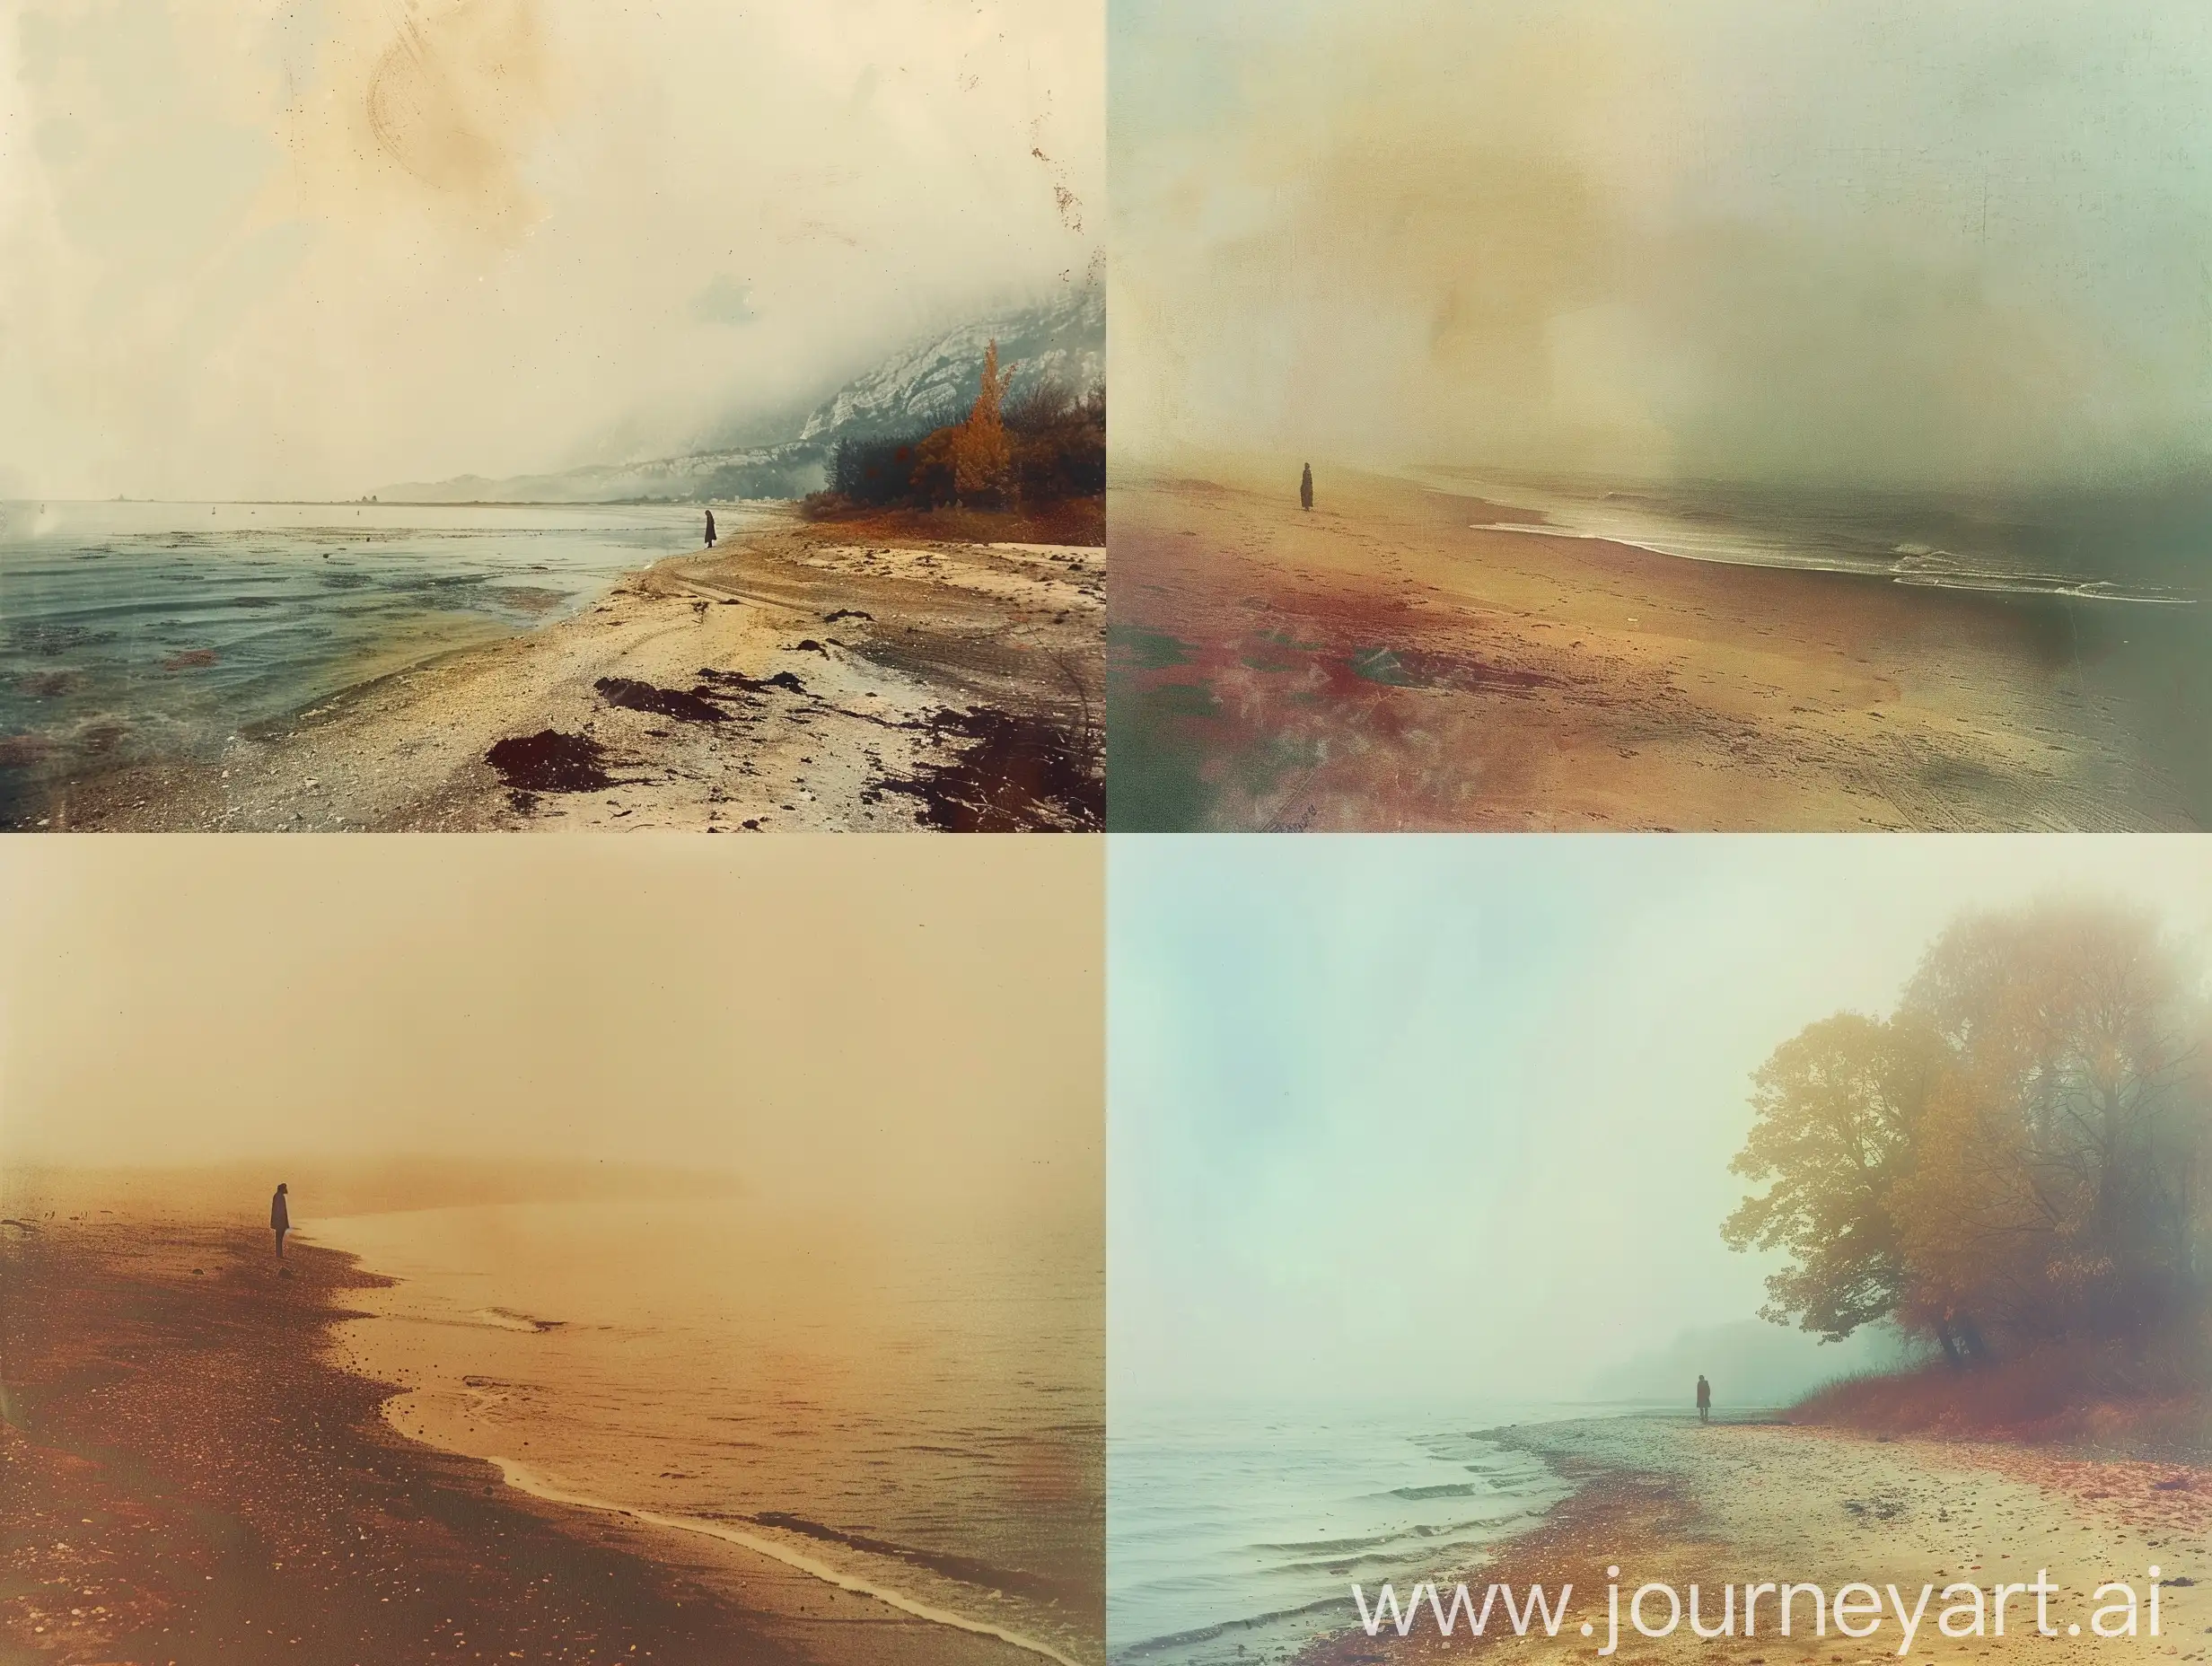 A distant view of a lonely French poet on a beach on the planet Juiter, 1970, autumn colors, misty morning